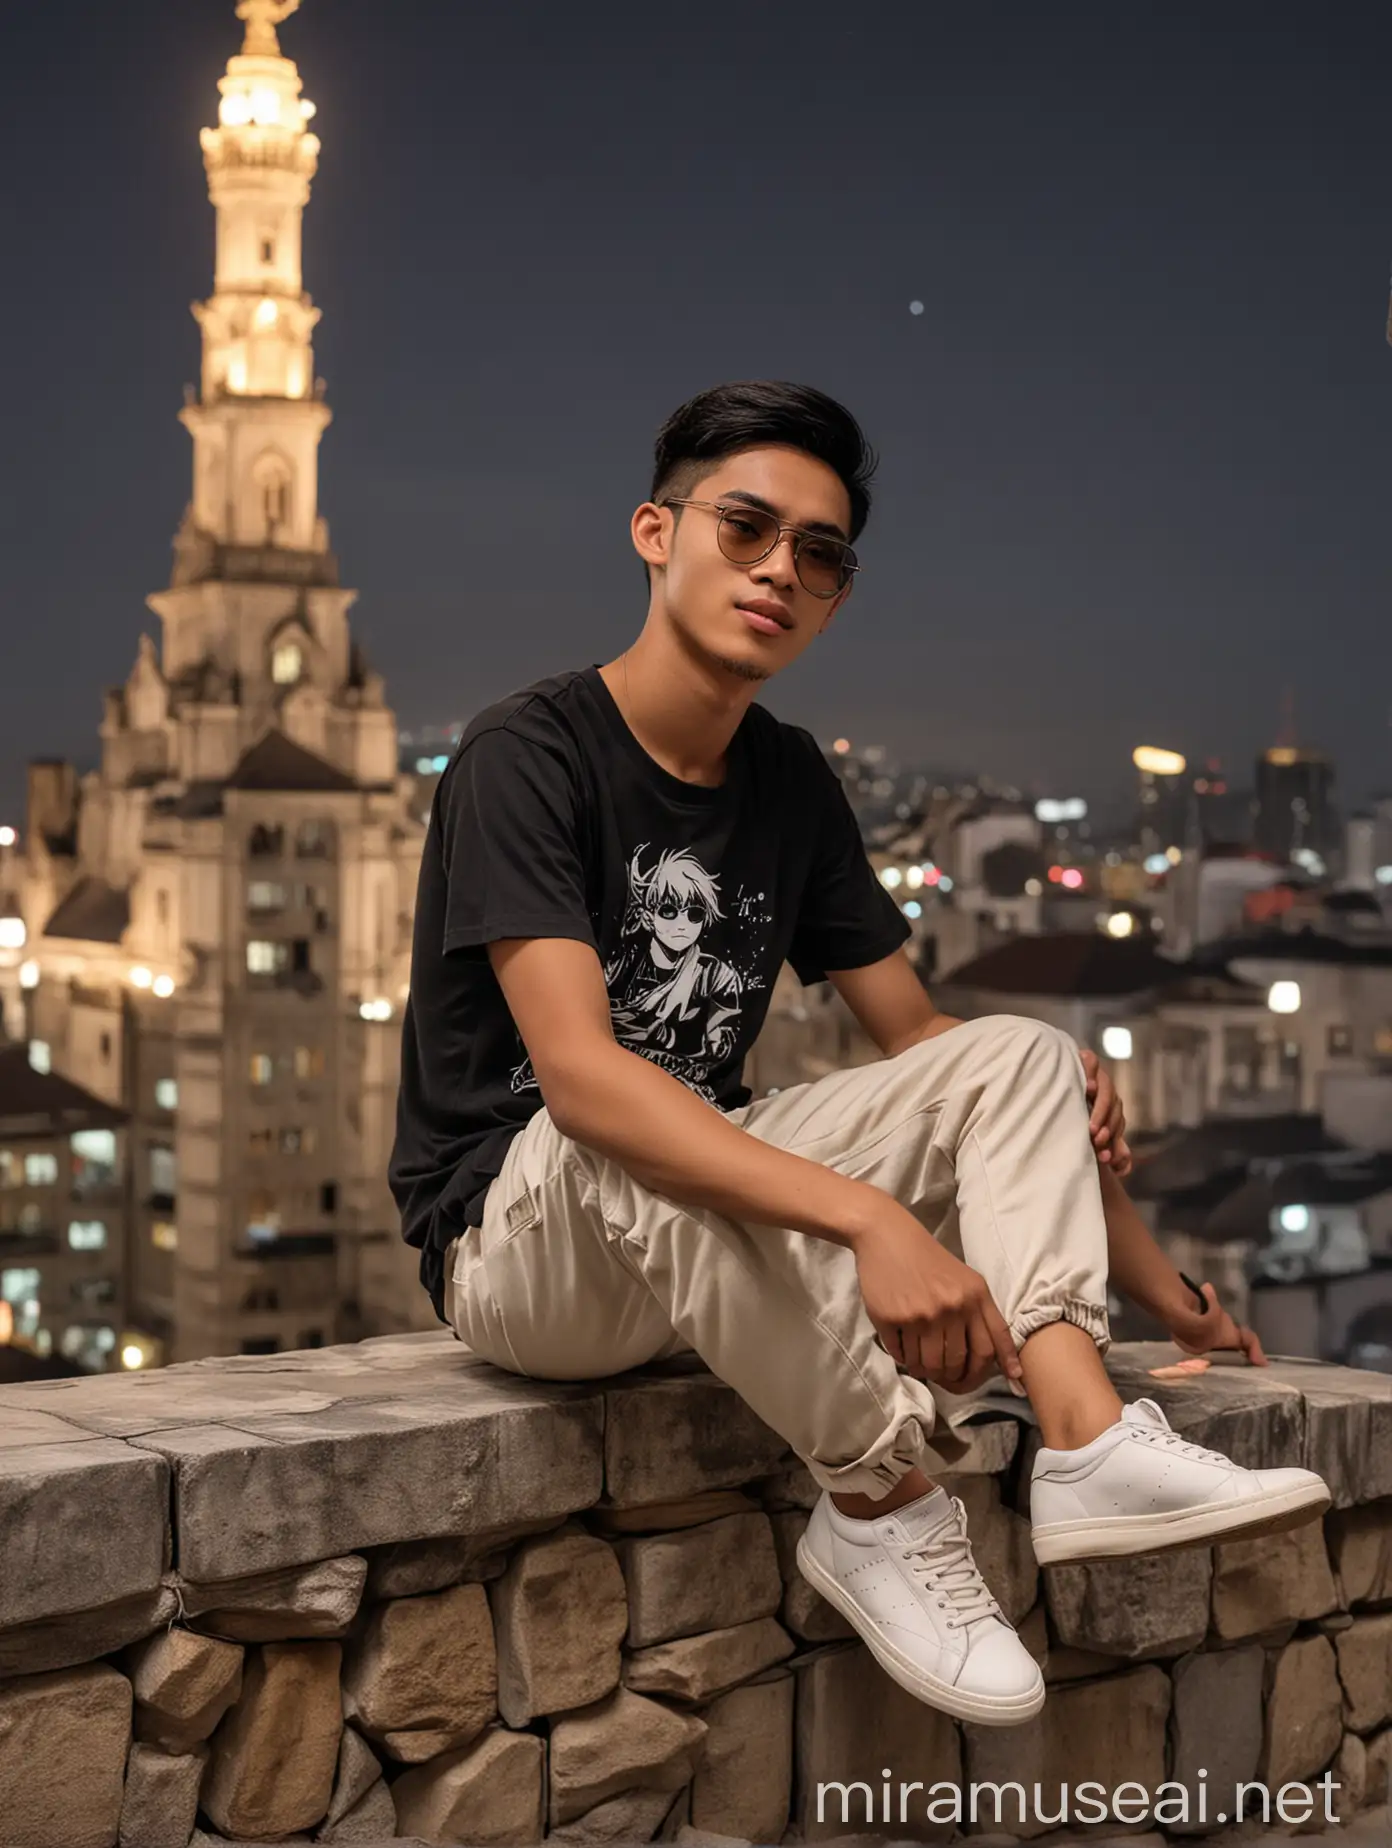 Dreamy Young Indonesian Man in Anime Shirt Captures Cityscape at Night in 8K HD